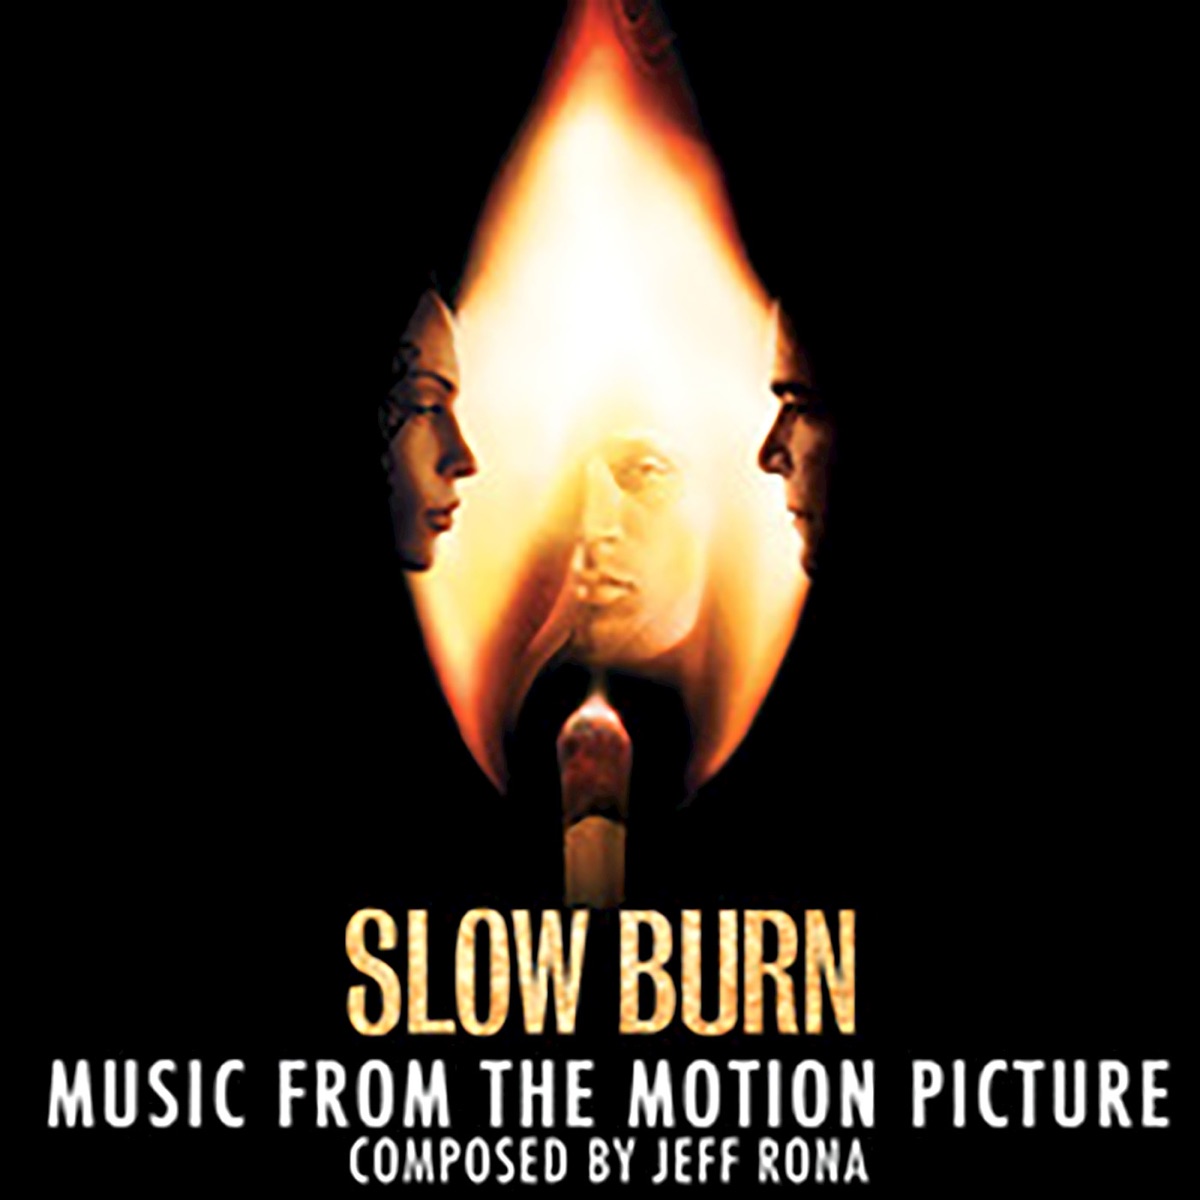 Slow Burn (Original Motion Picture Soundtrack) by Jeff Rona on Apple Music